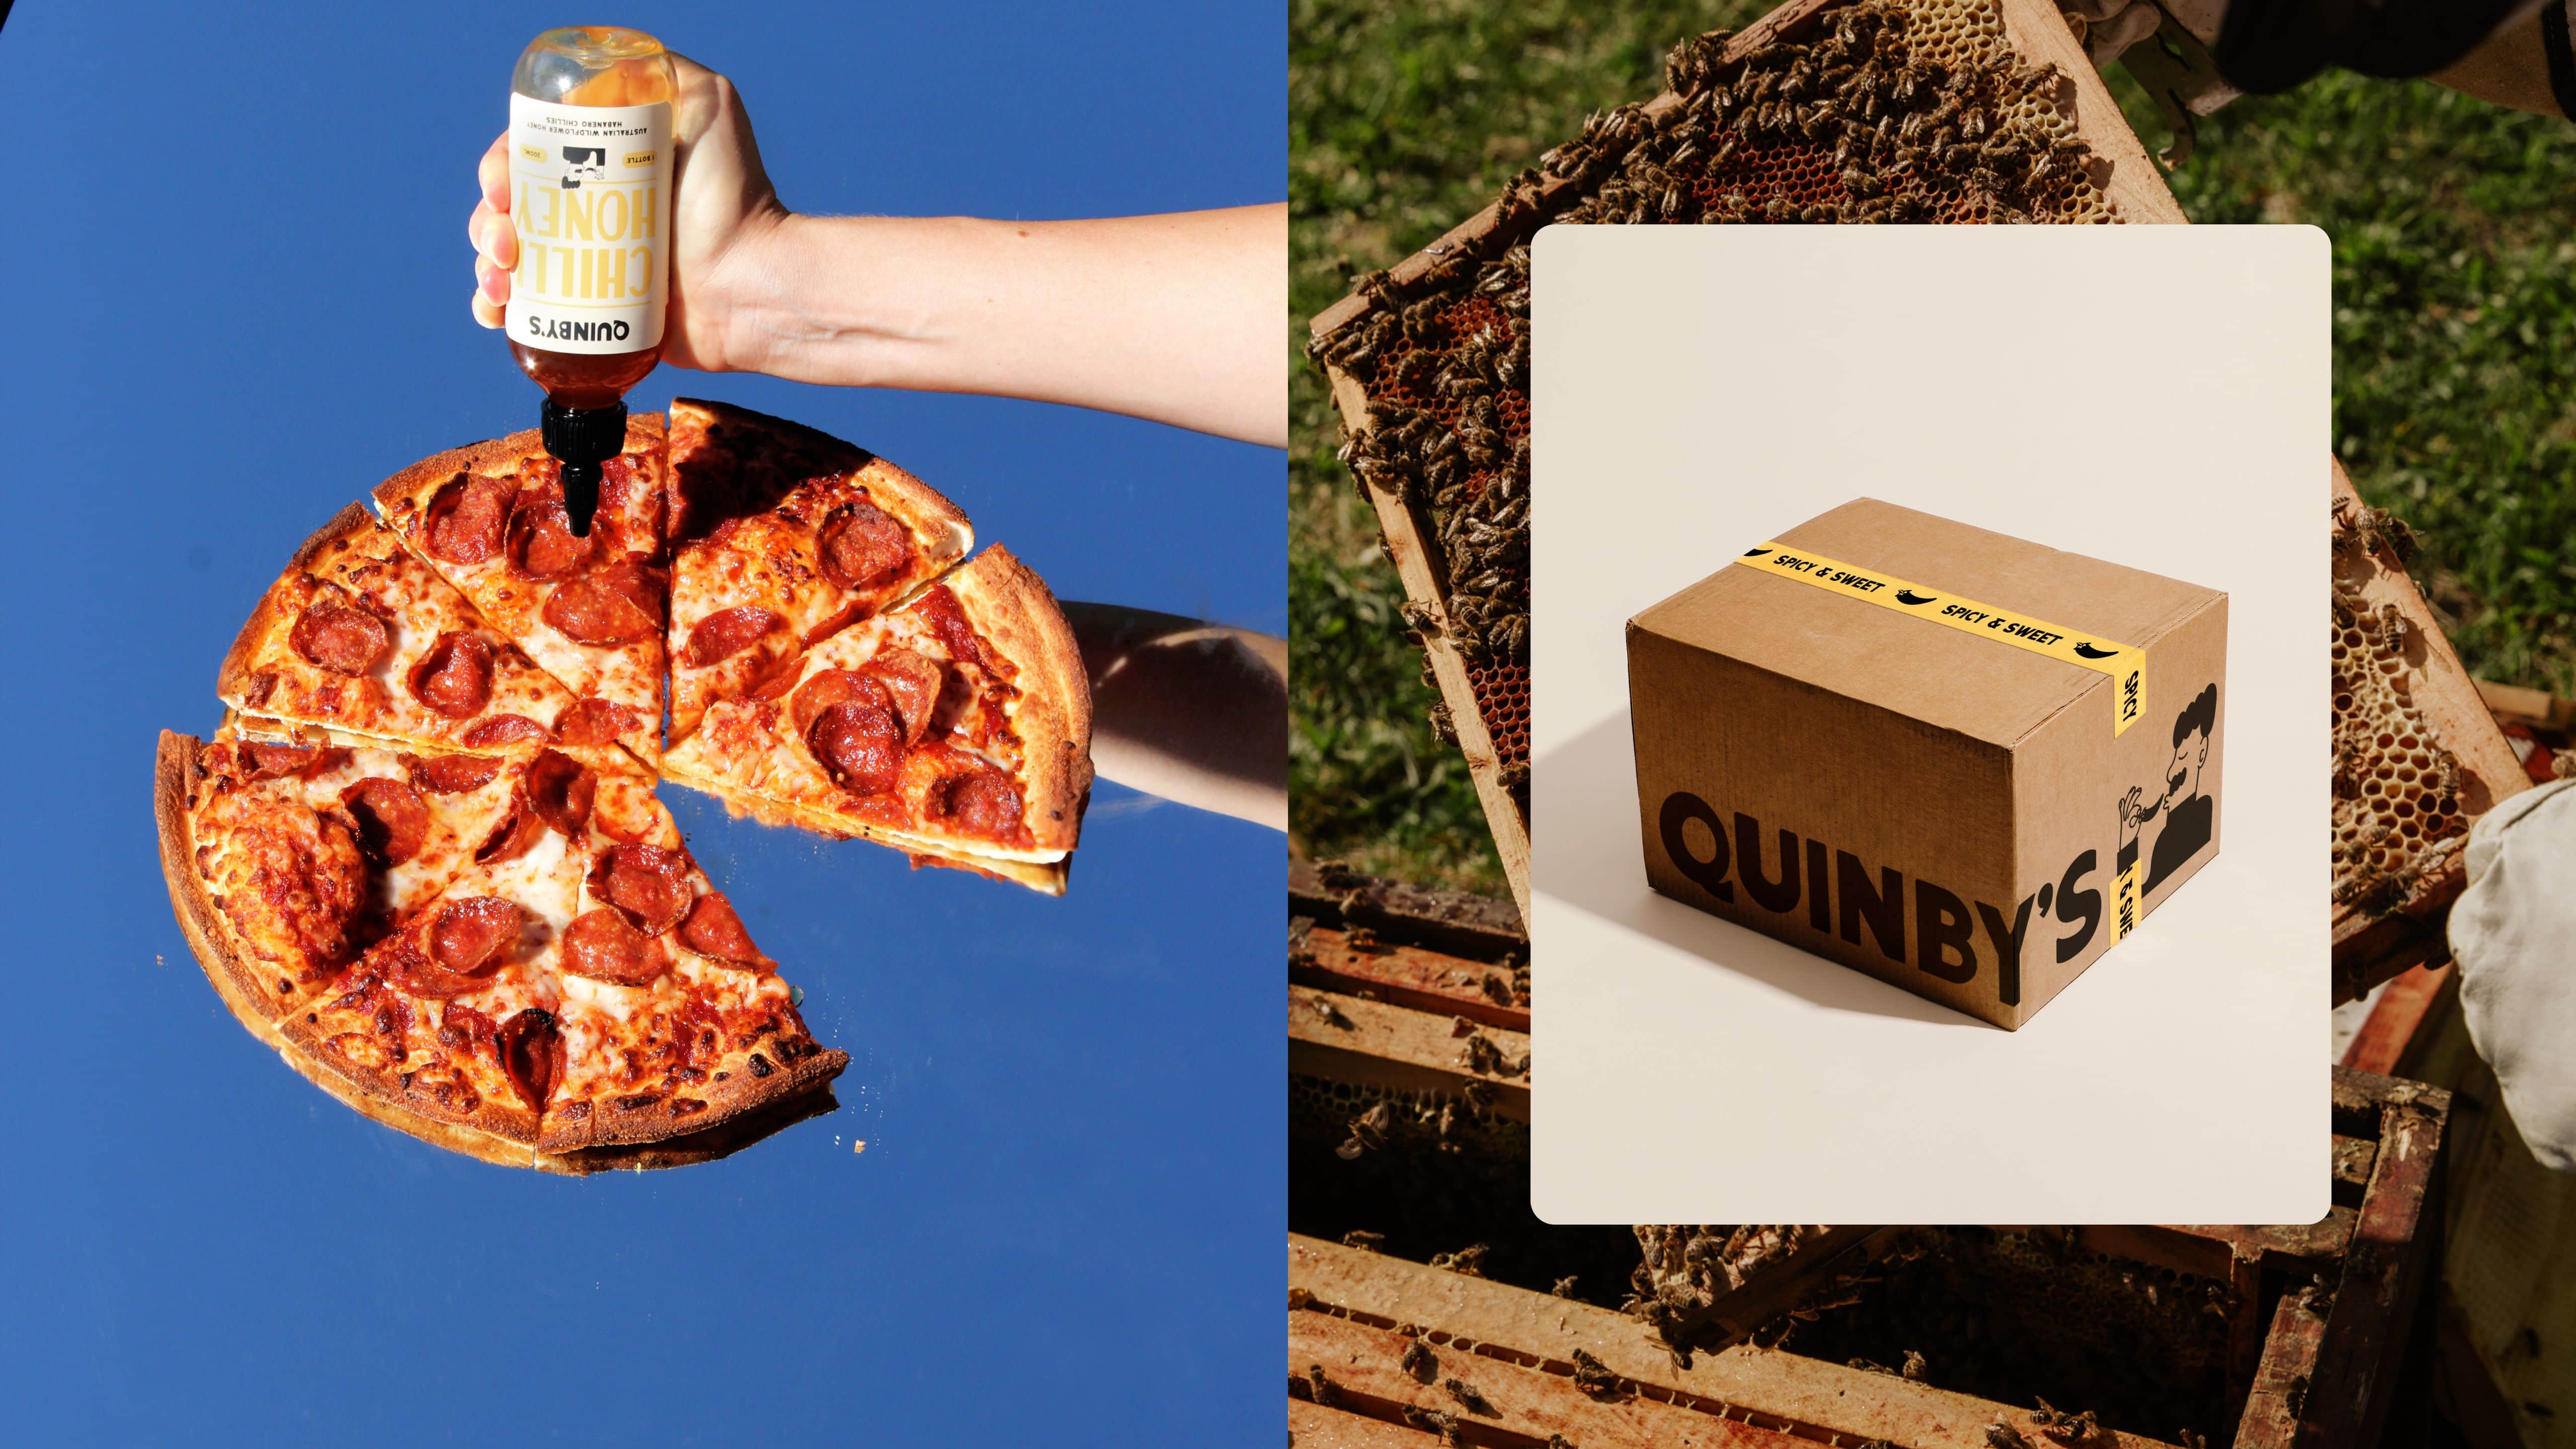 Quinby's Brand Identity & Packaging After Hours